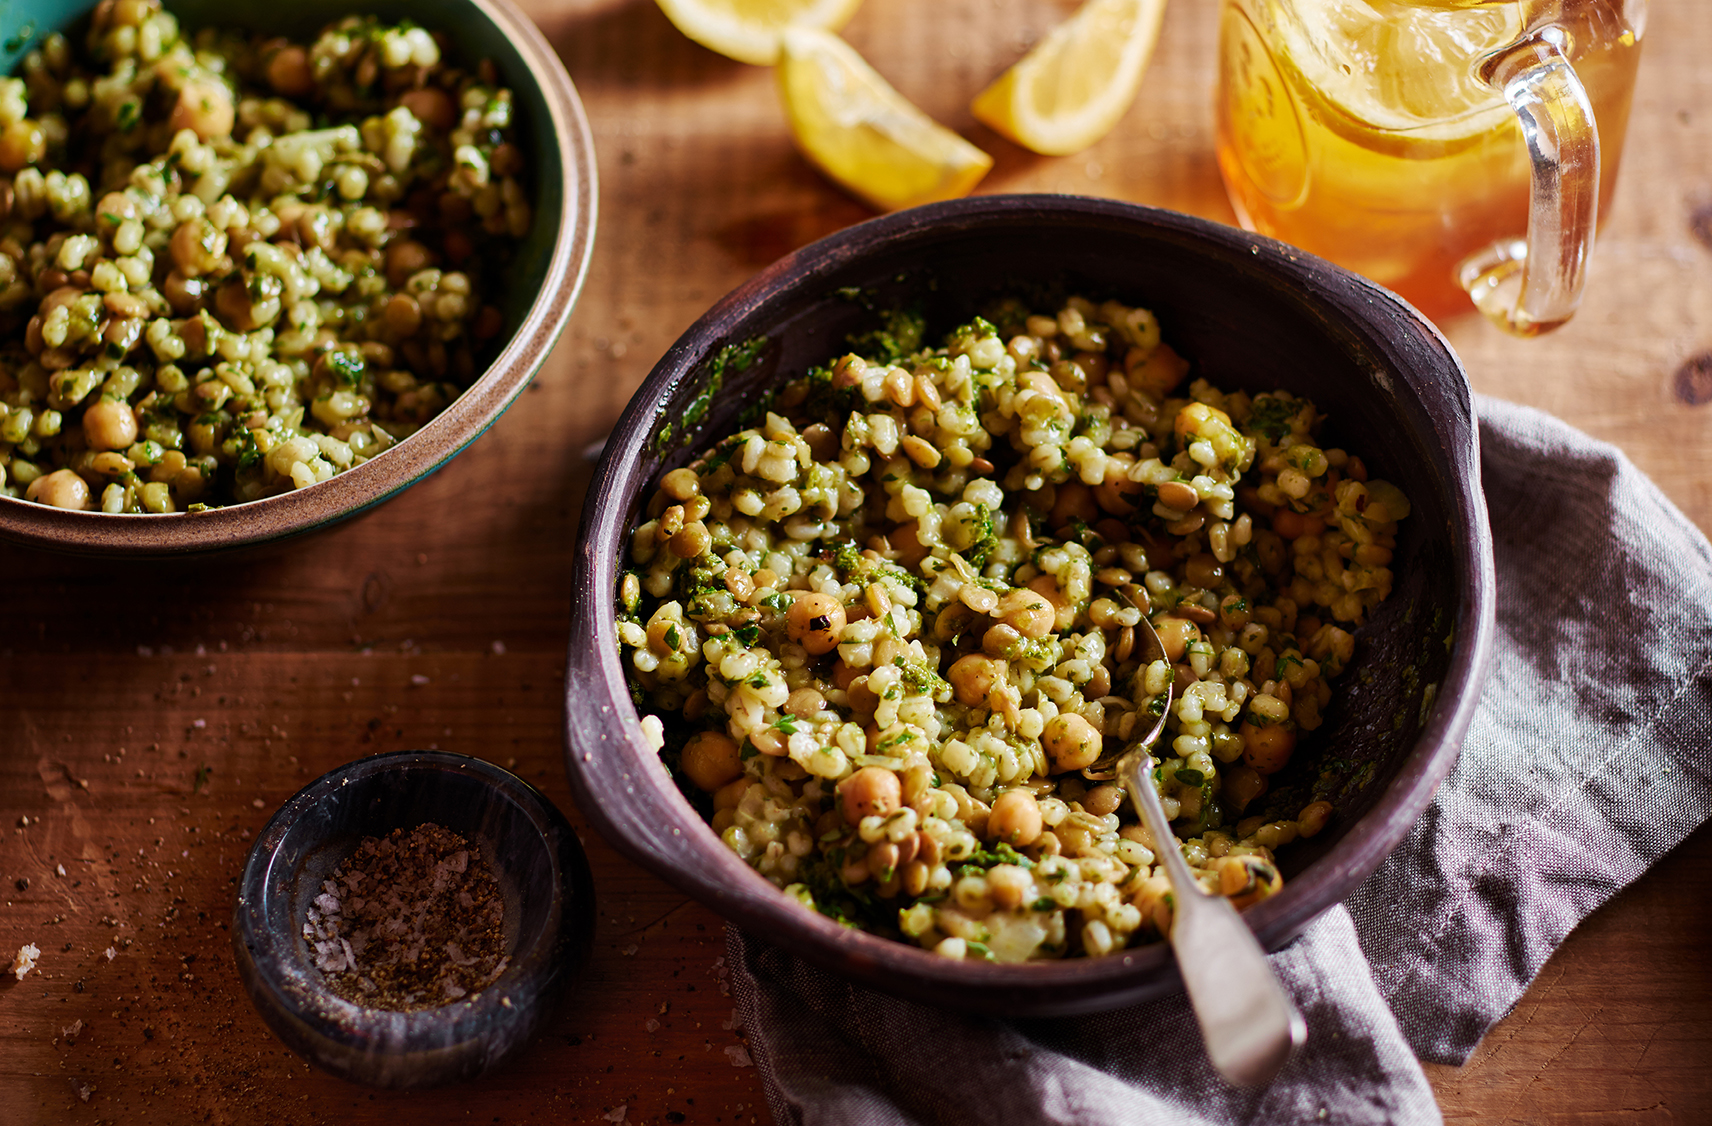 A trio of barley, lentils and chickpeas tossed in zesty green vinaigrette